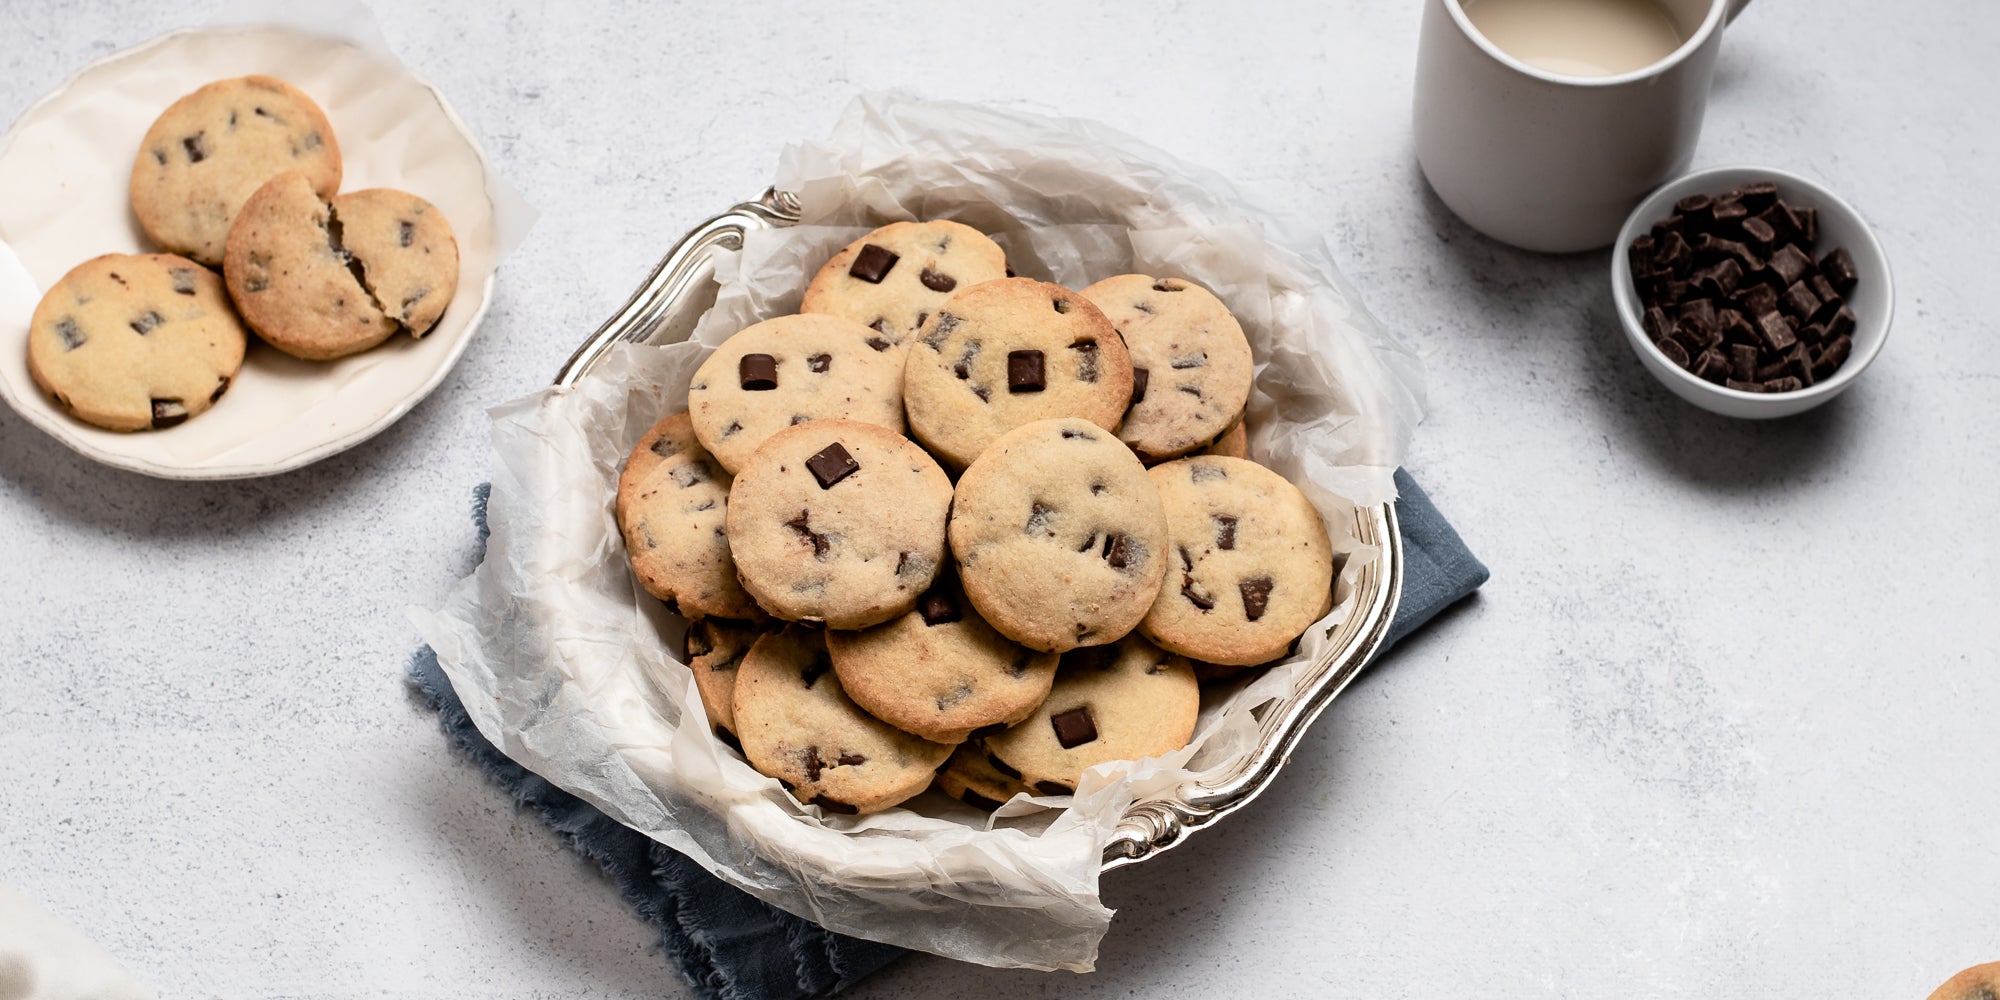 A cookie tin of Chocolate Chunk Shortbread biscuits, next to a small bowl of chocolate chunks